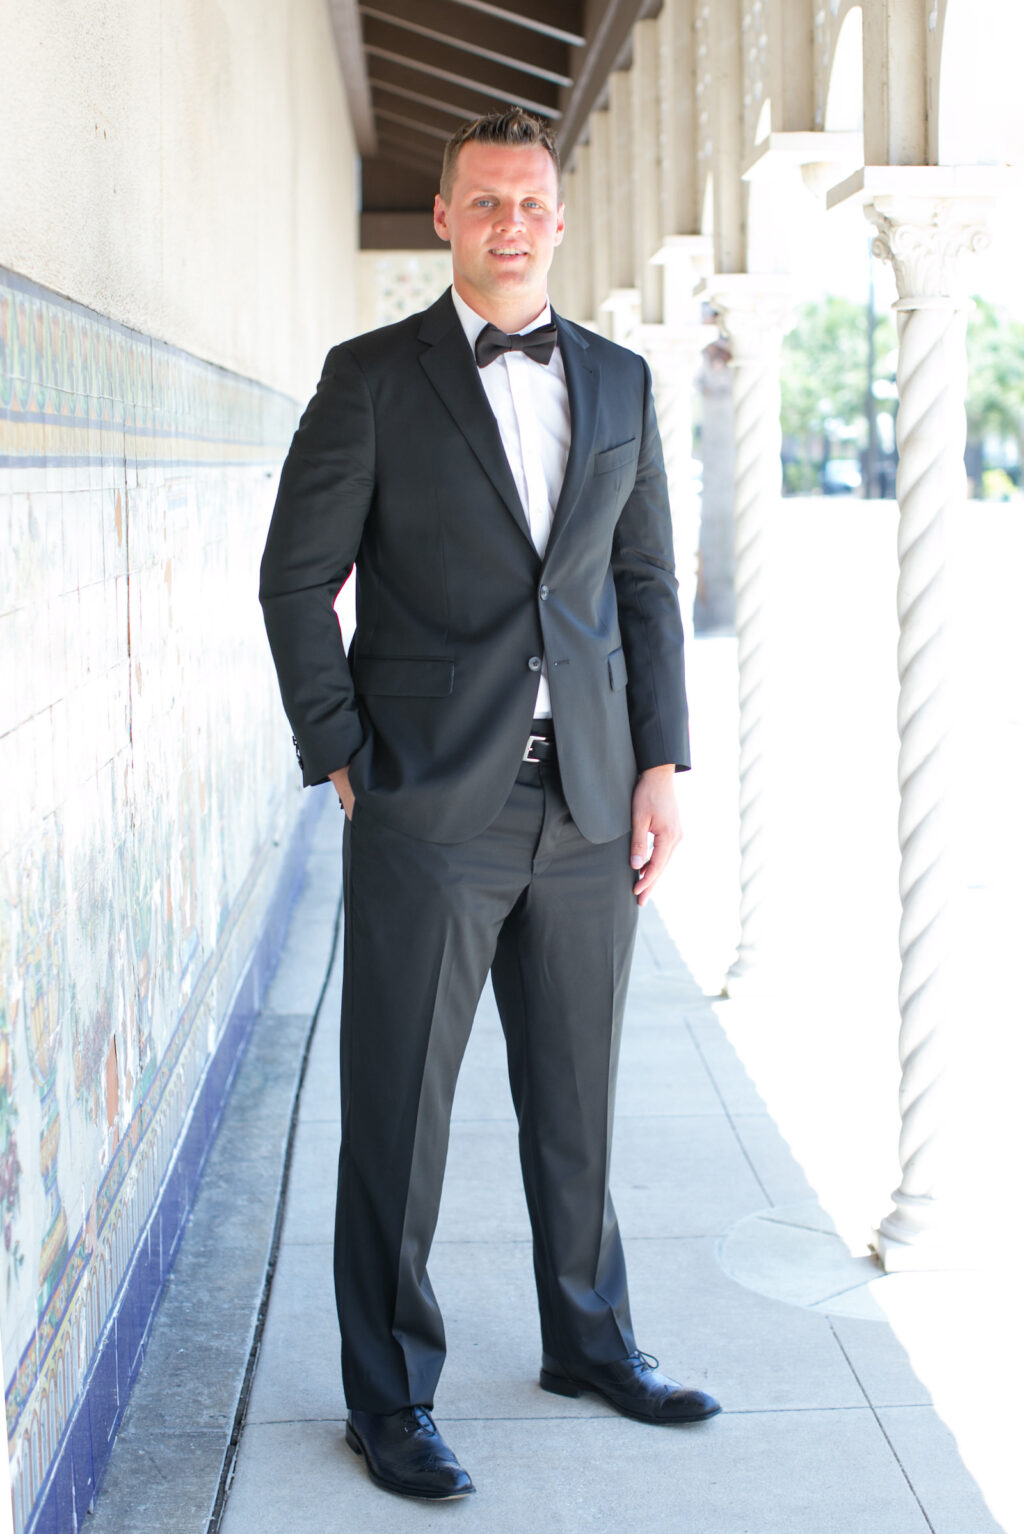 Groom in Black Tux with Black Bow Tie Portrait | Carrie Wildes Photography